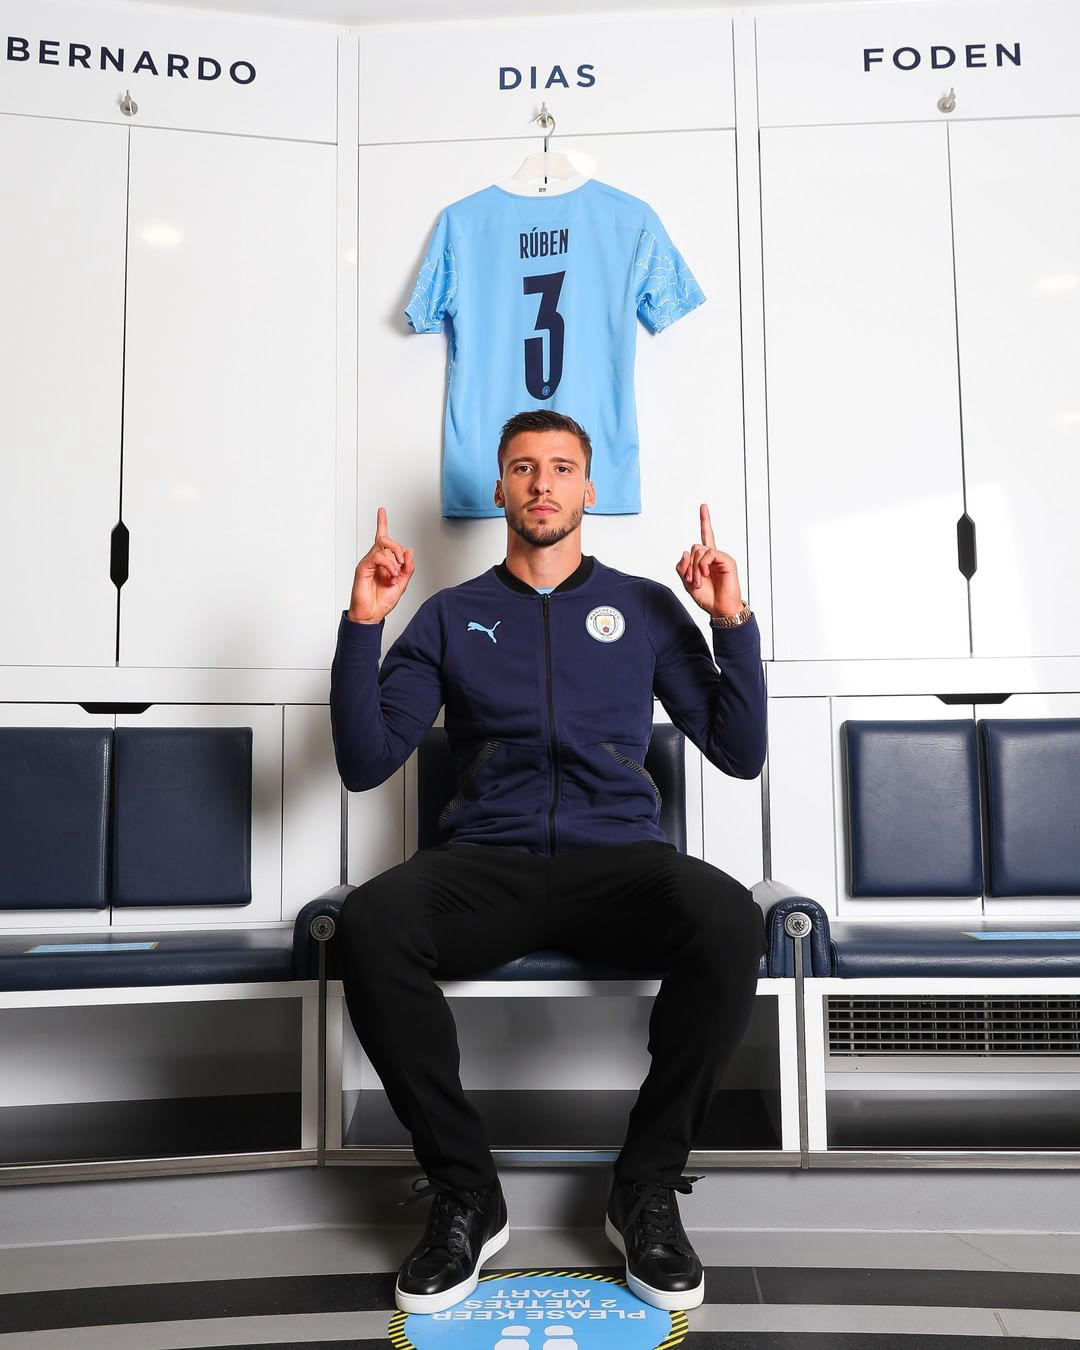 UEFA Champions League - It's been two years since Man City signed Rúben Dias